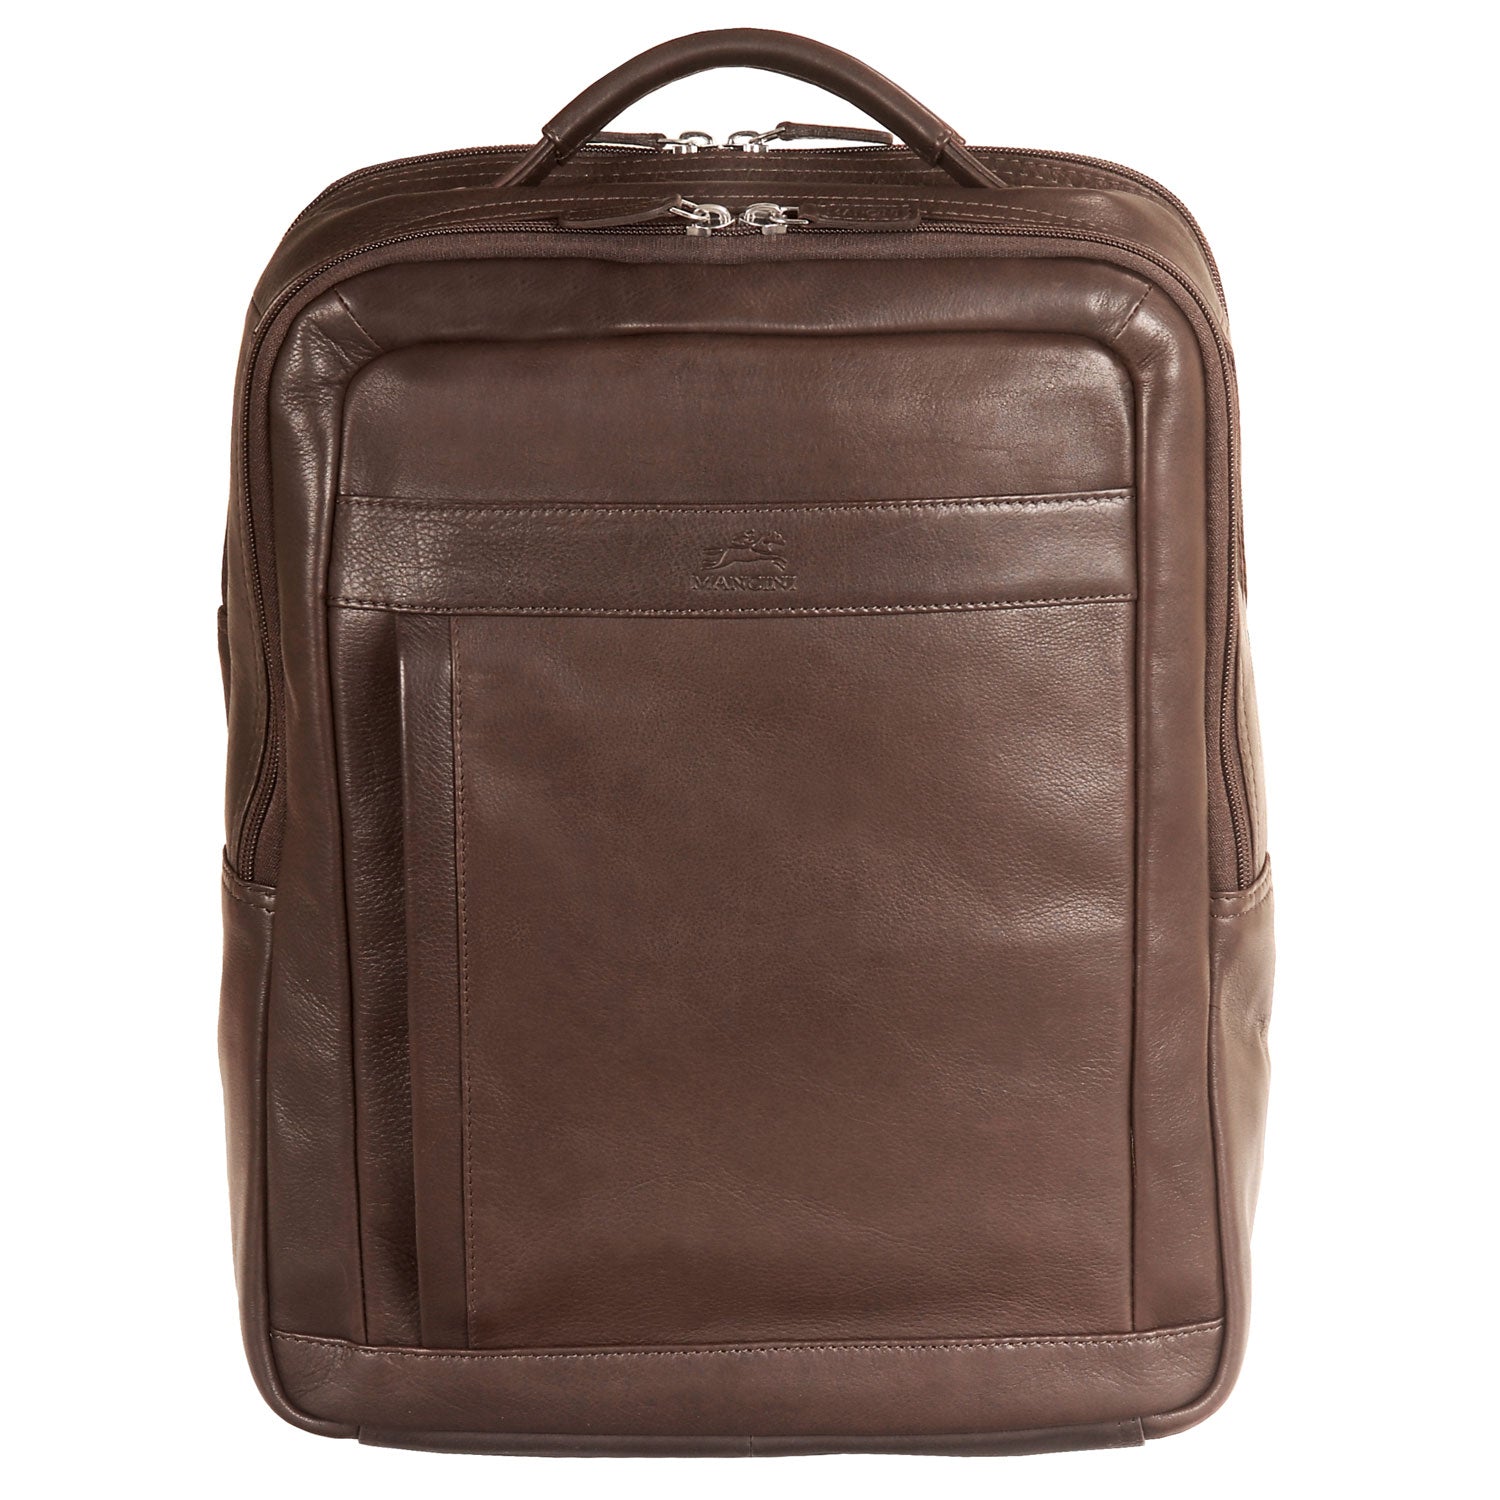 Mancini Leather Backpack for 15.6" Laptop / Tablet, 12" x 5.25" x 15", Brown